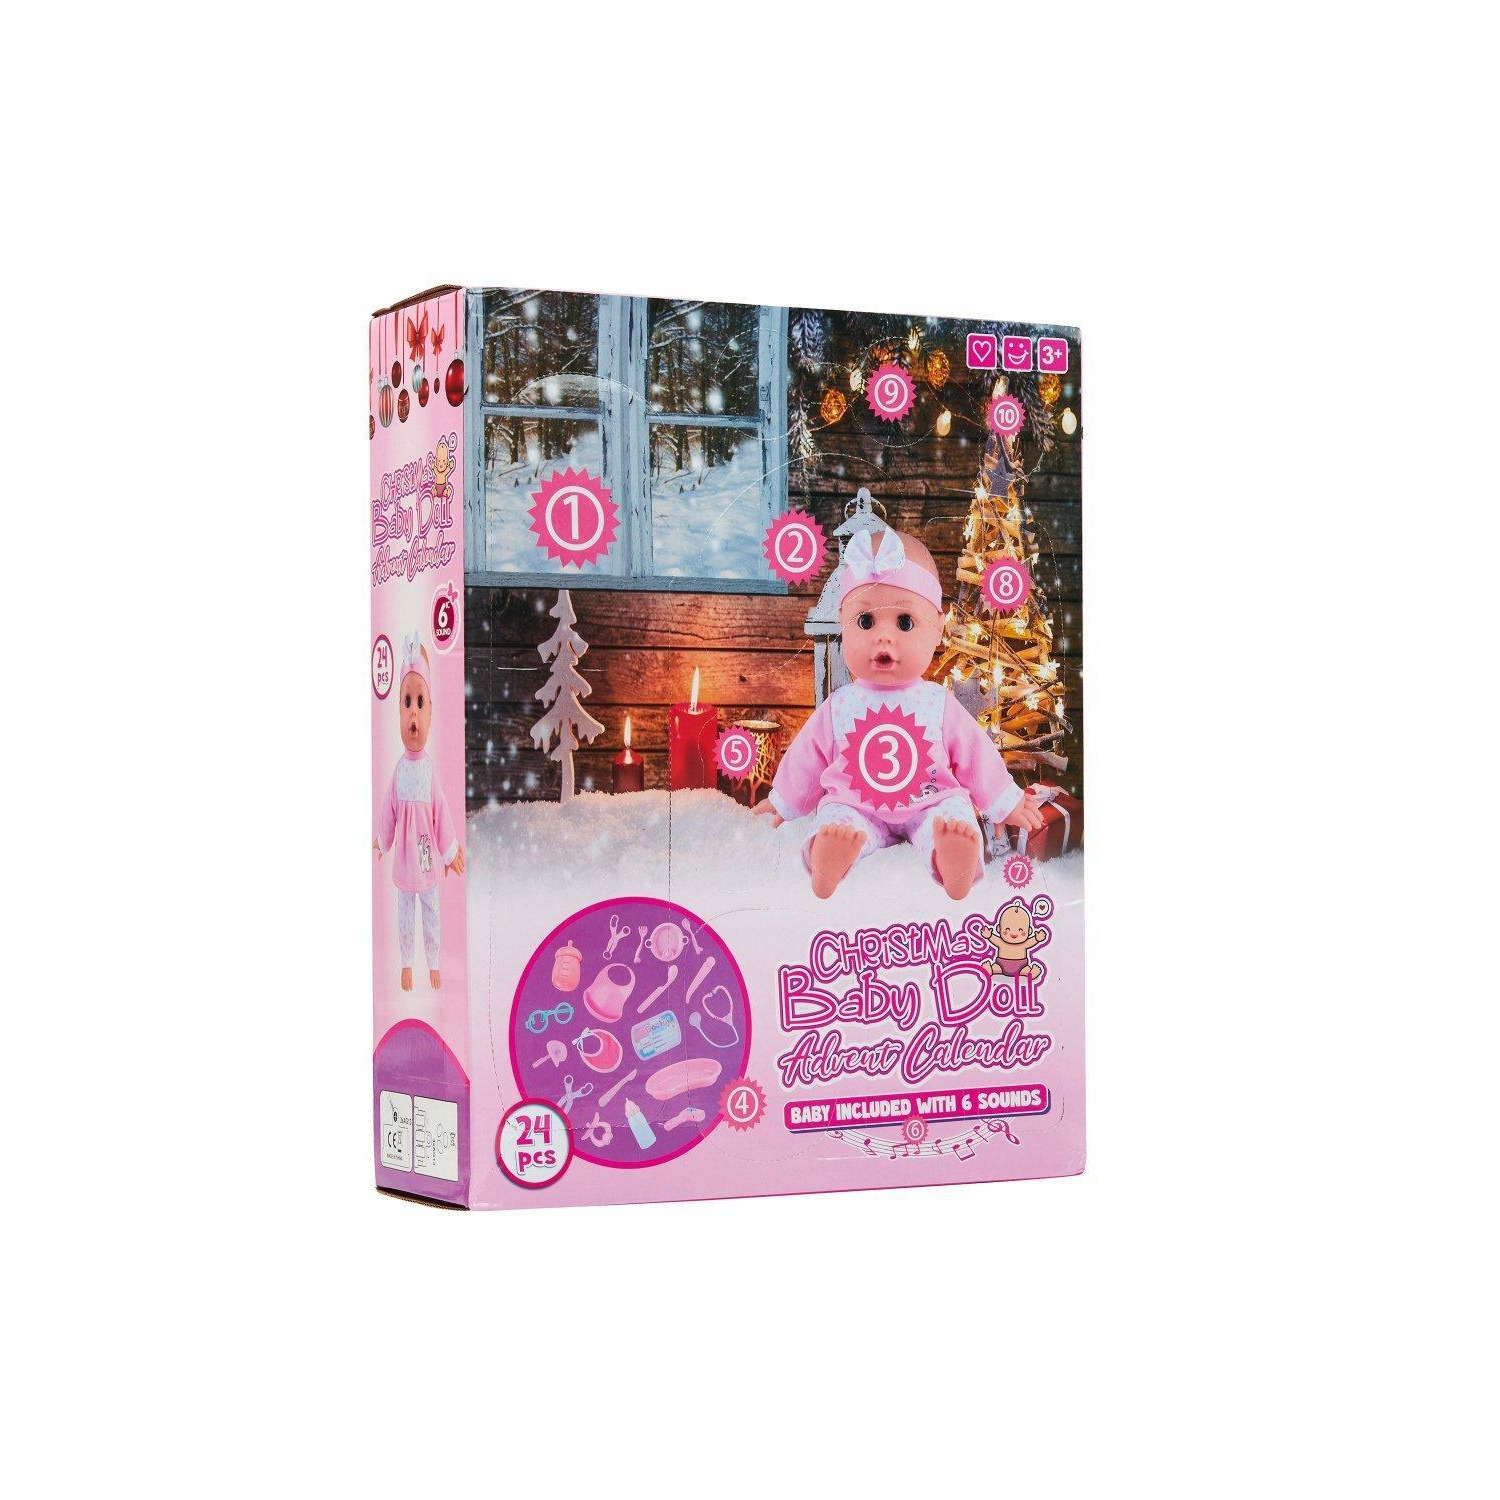 Baby Doll Accessories Christmas Advent Calendar - image 1